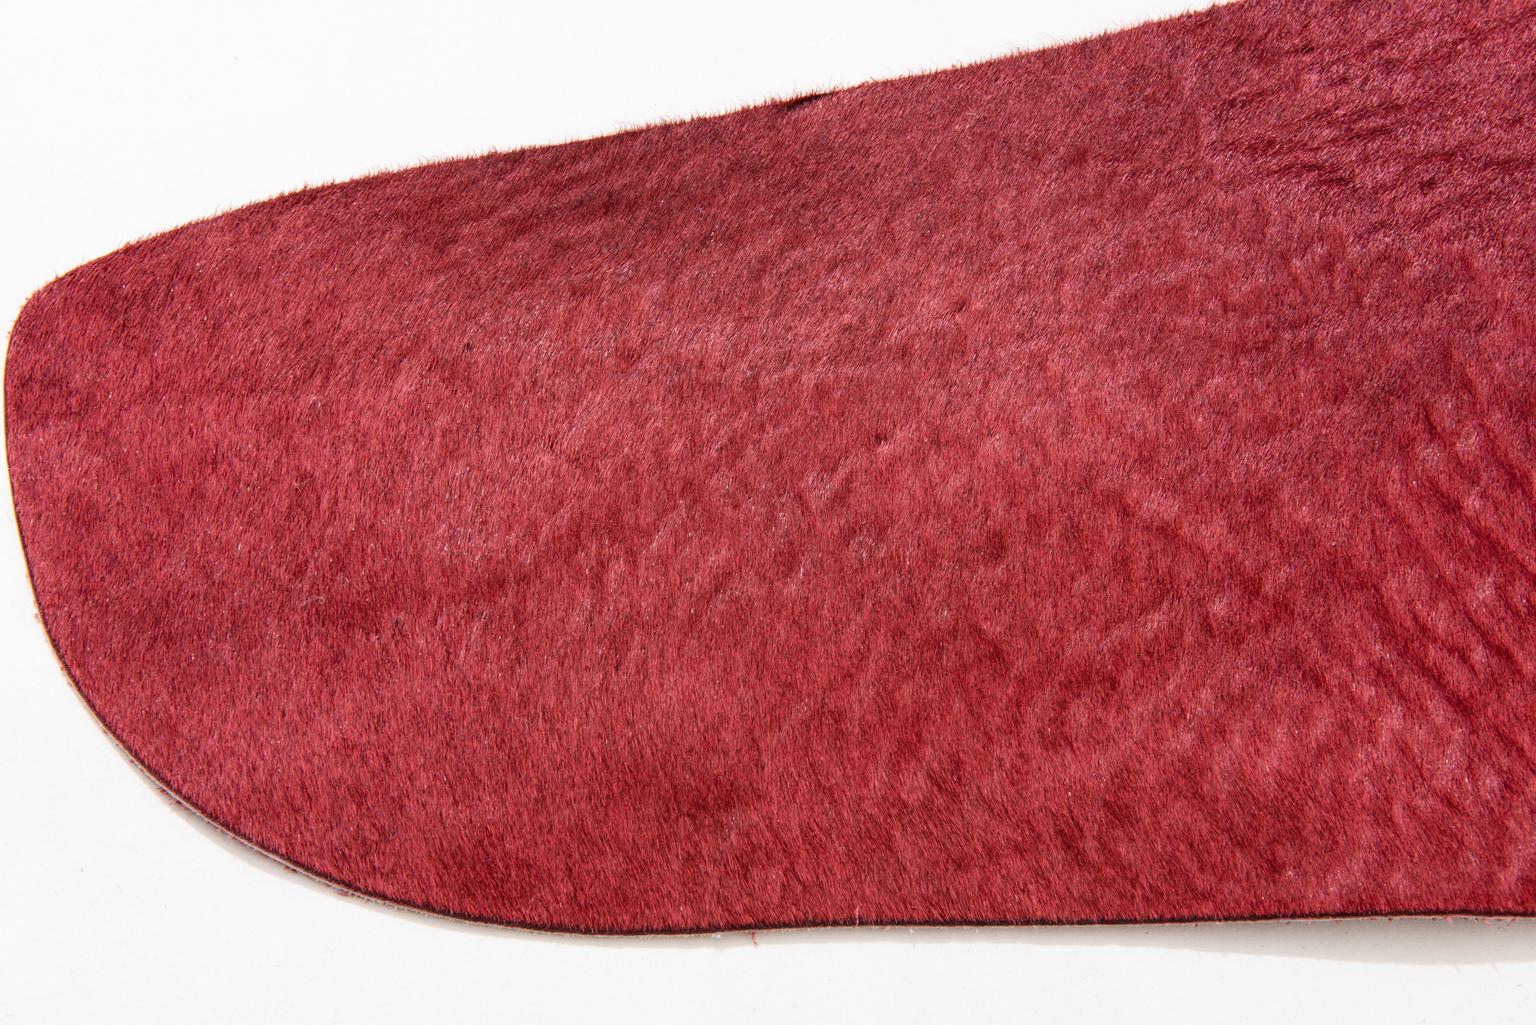 Leather Carpet Red Colored 1